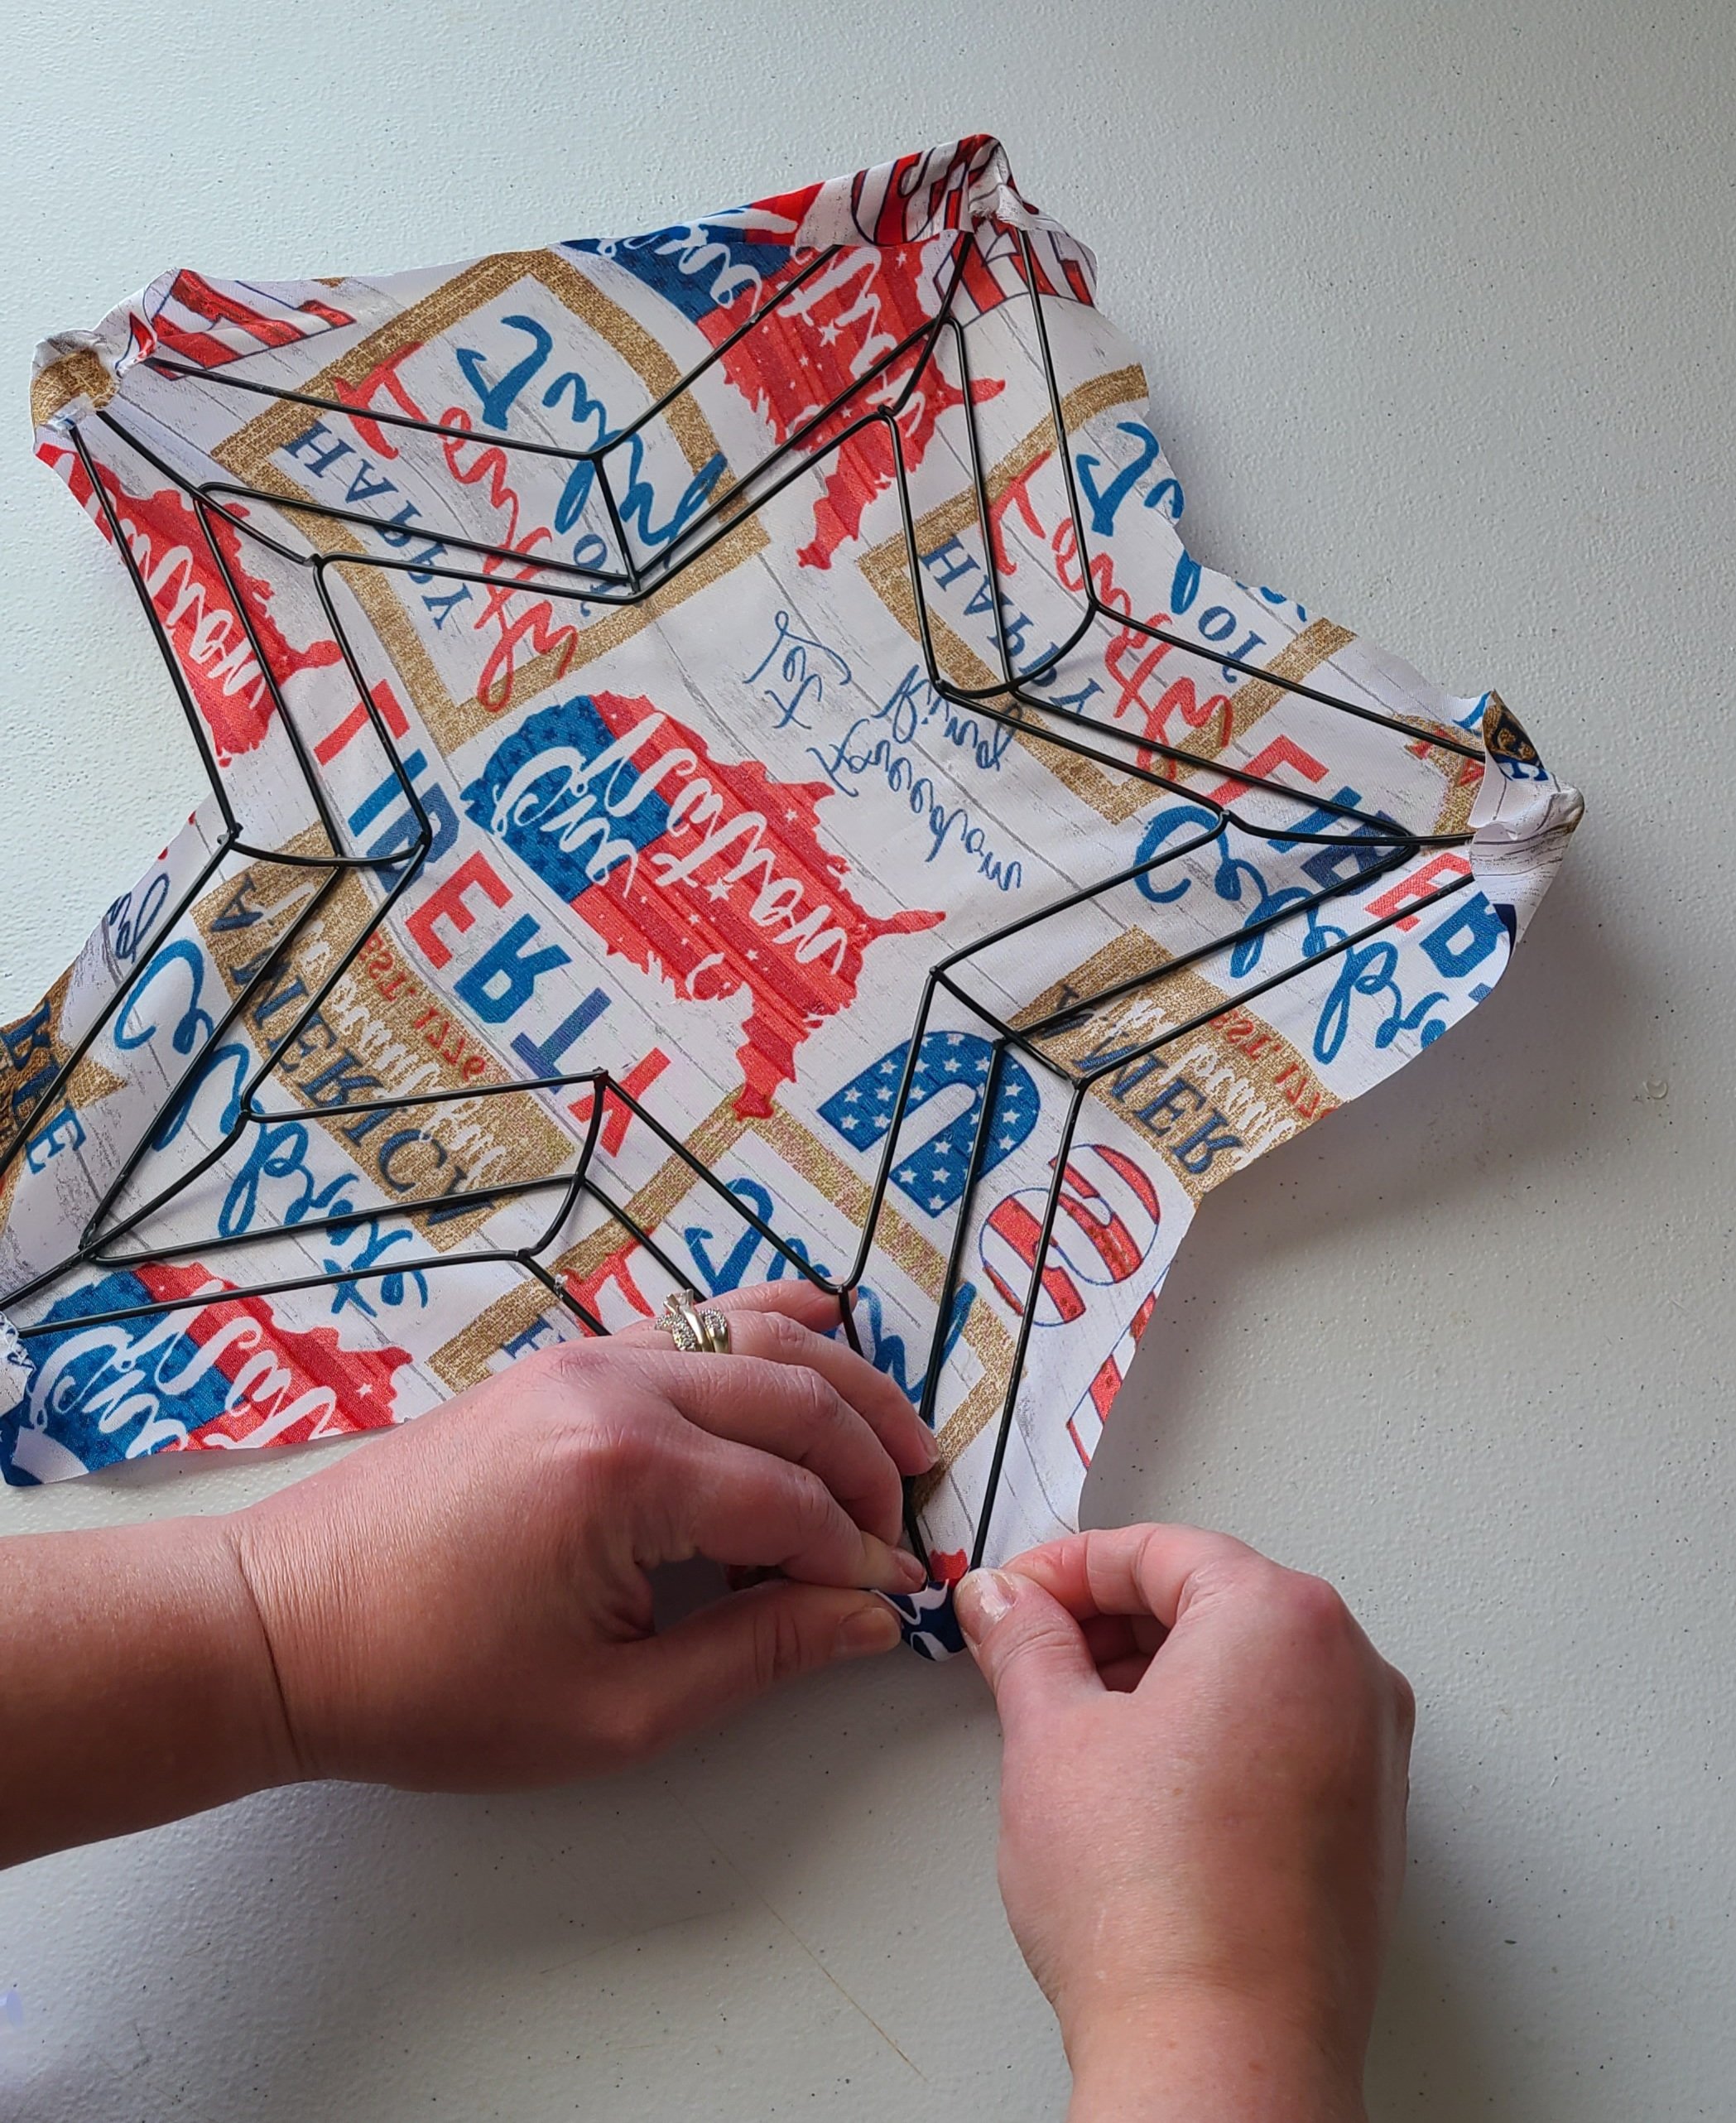 Folding the patriotic bandana over the bottom right tip of the star wreath form.